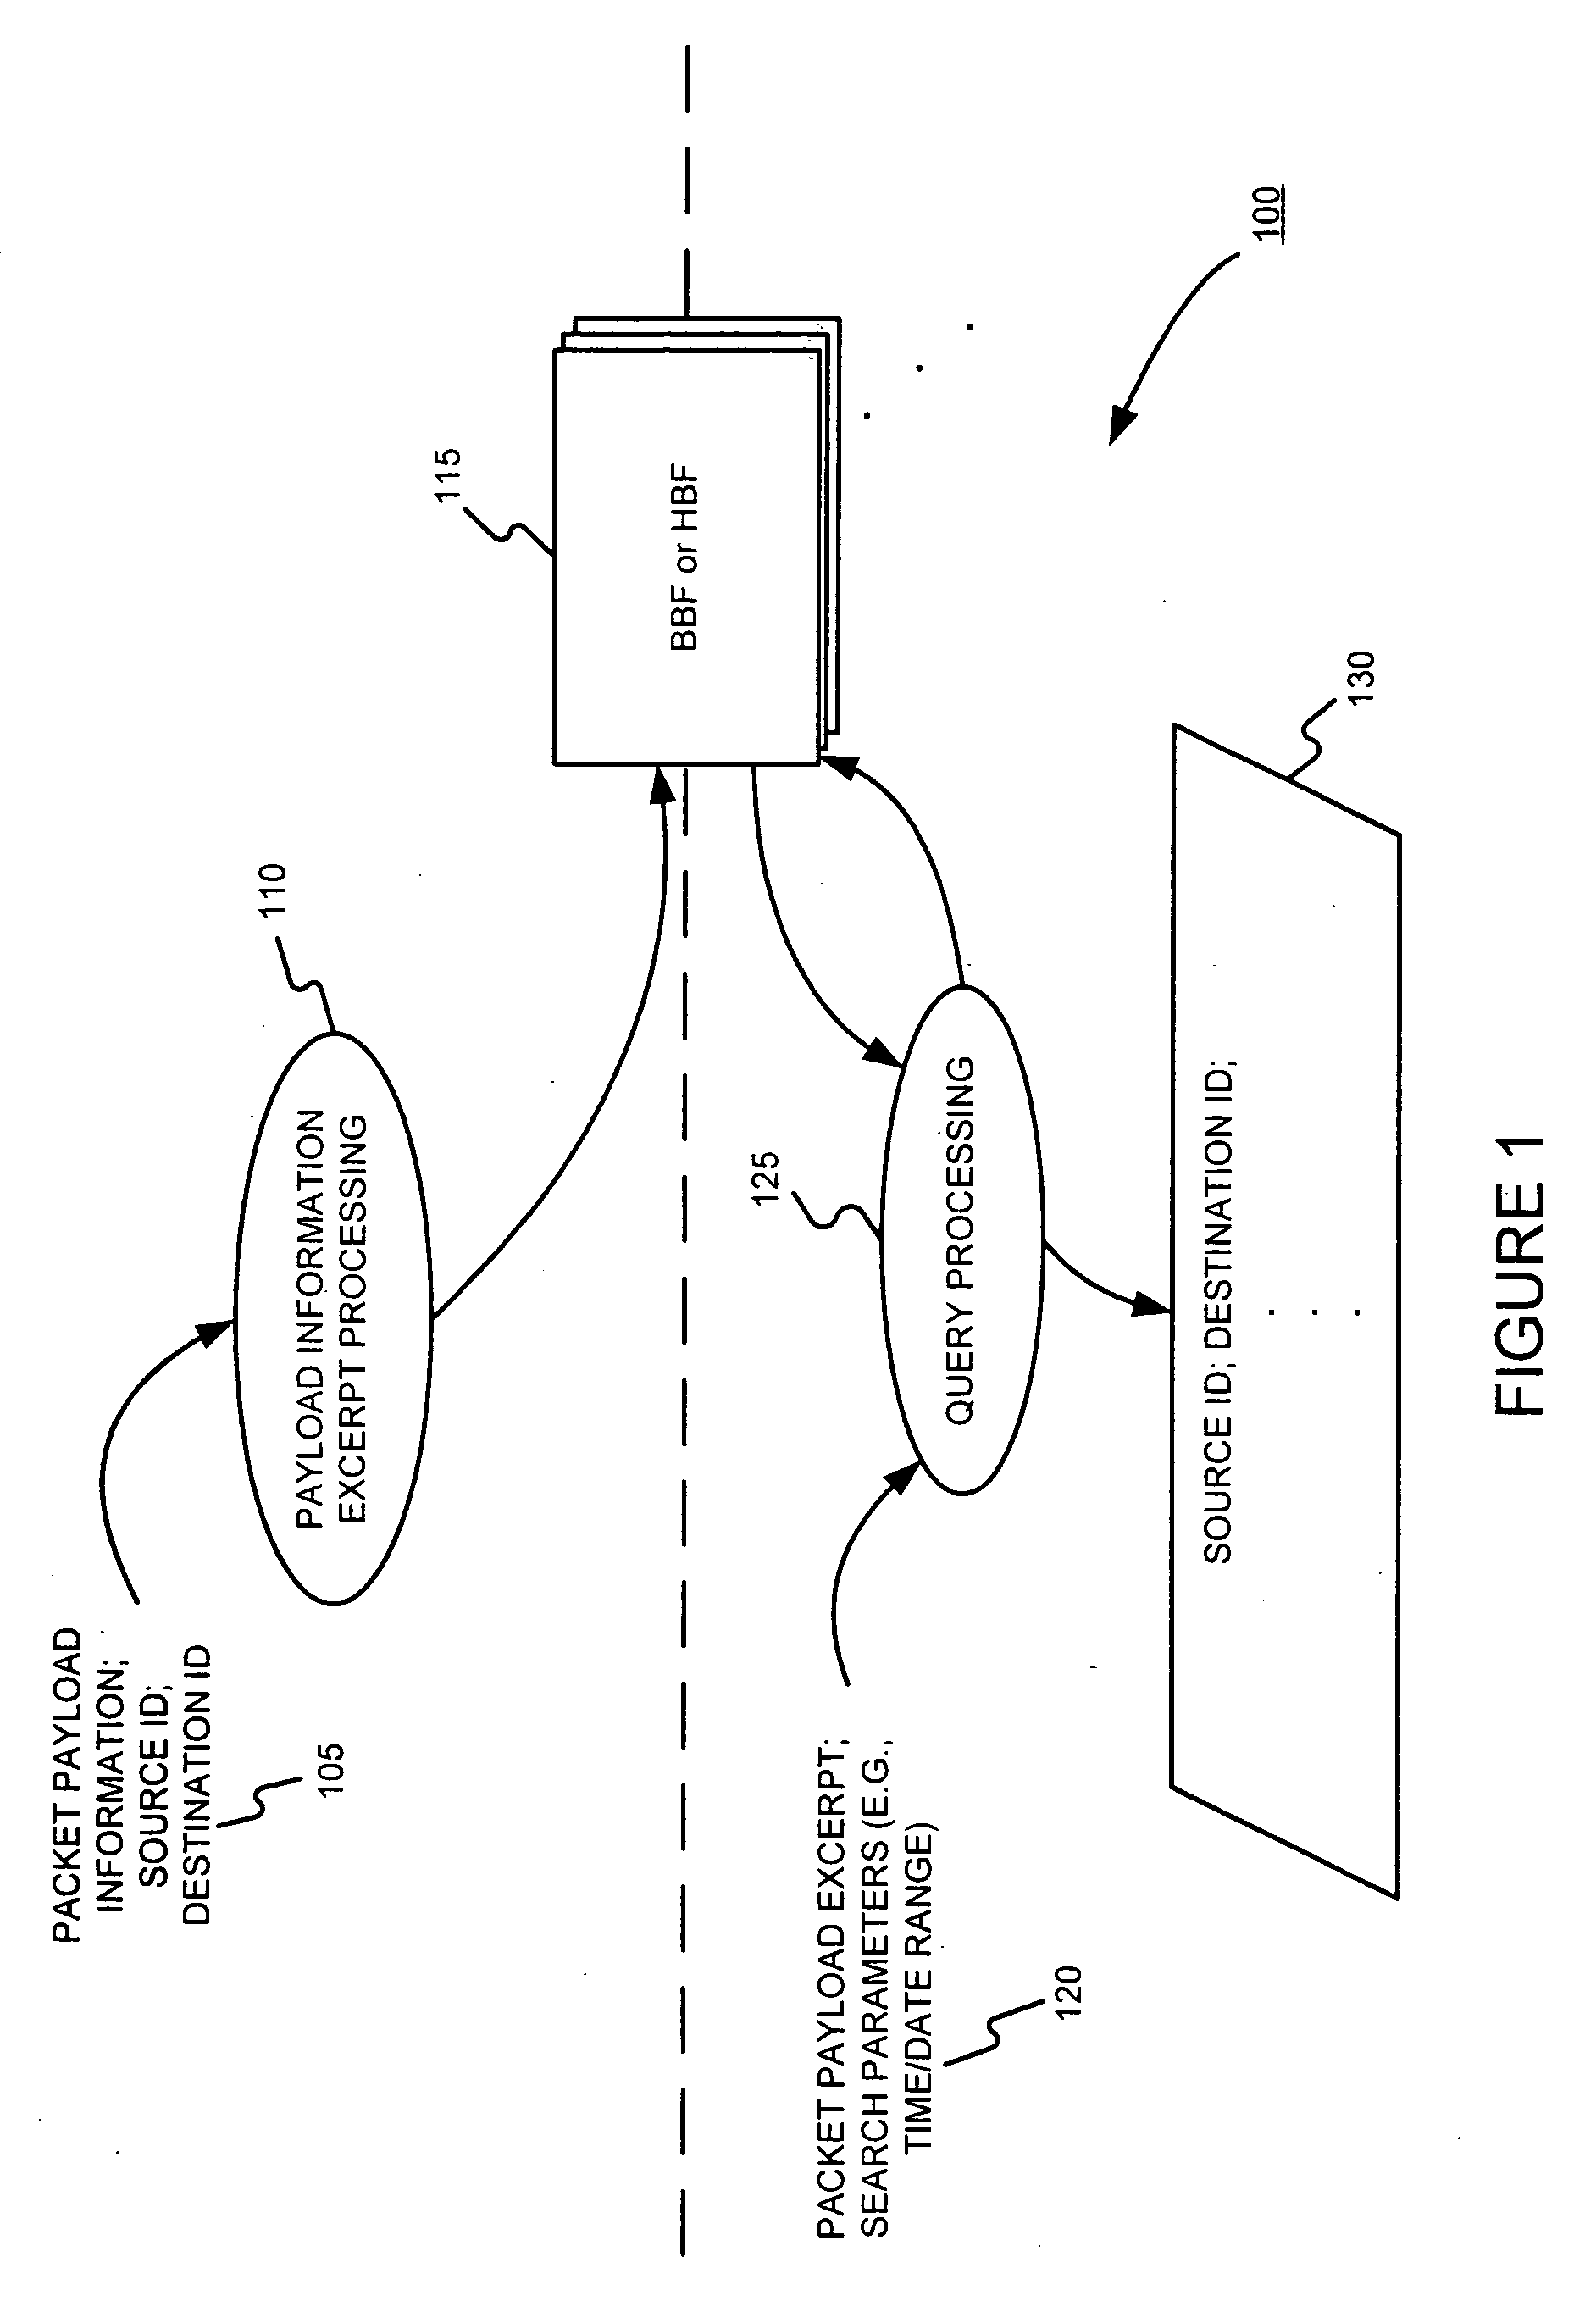 Facilitating storage and querying of payload attribution information